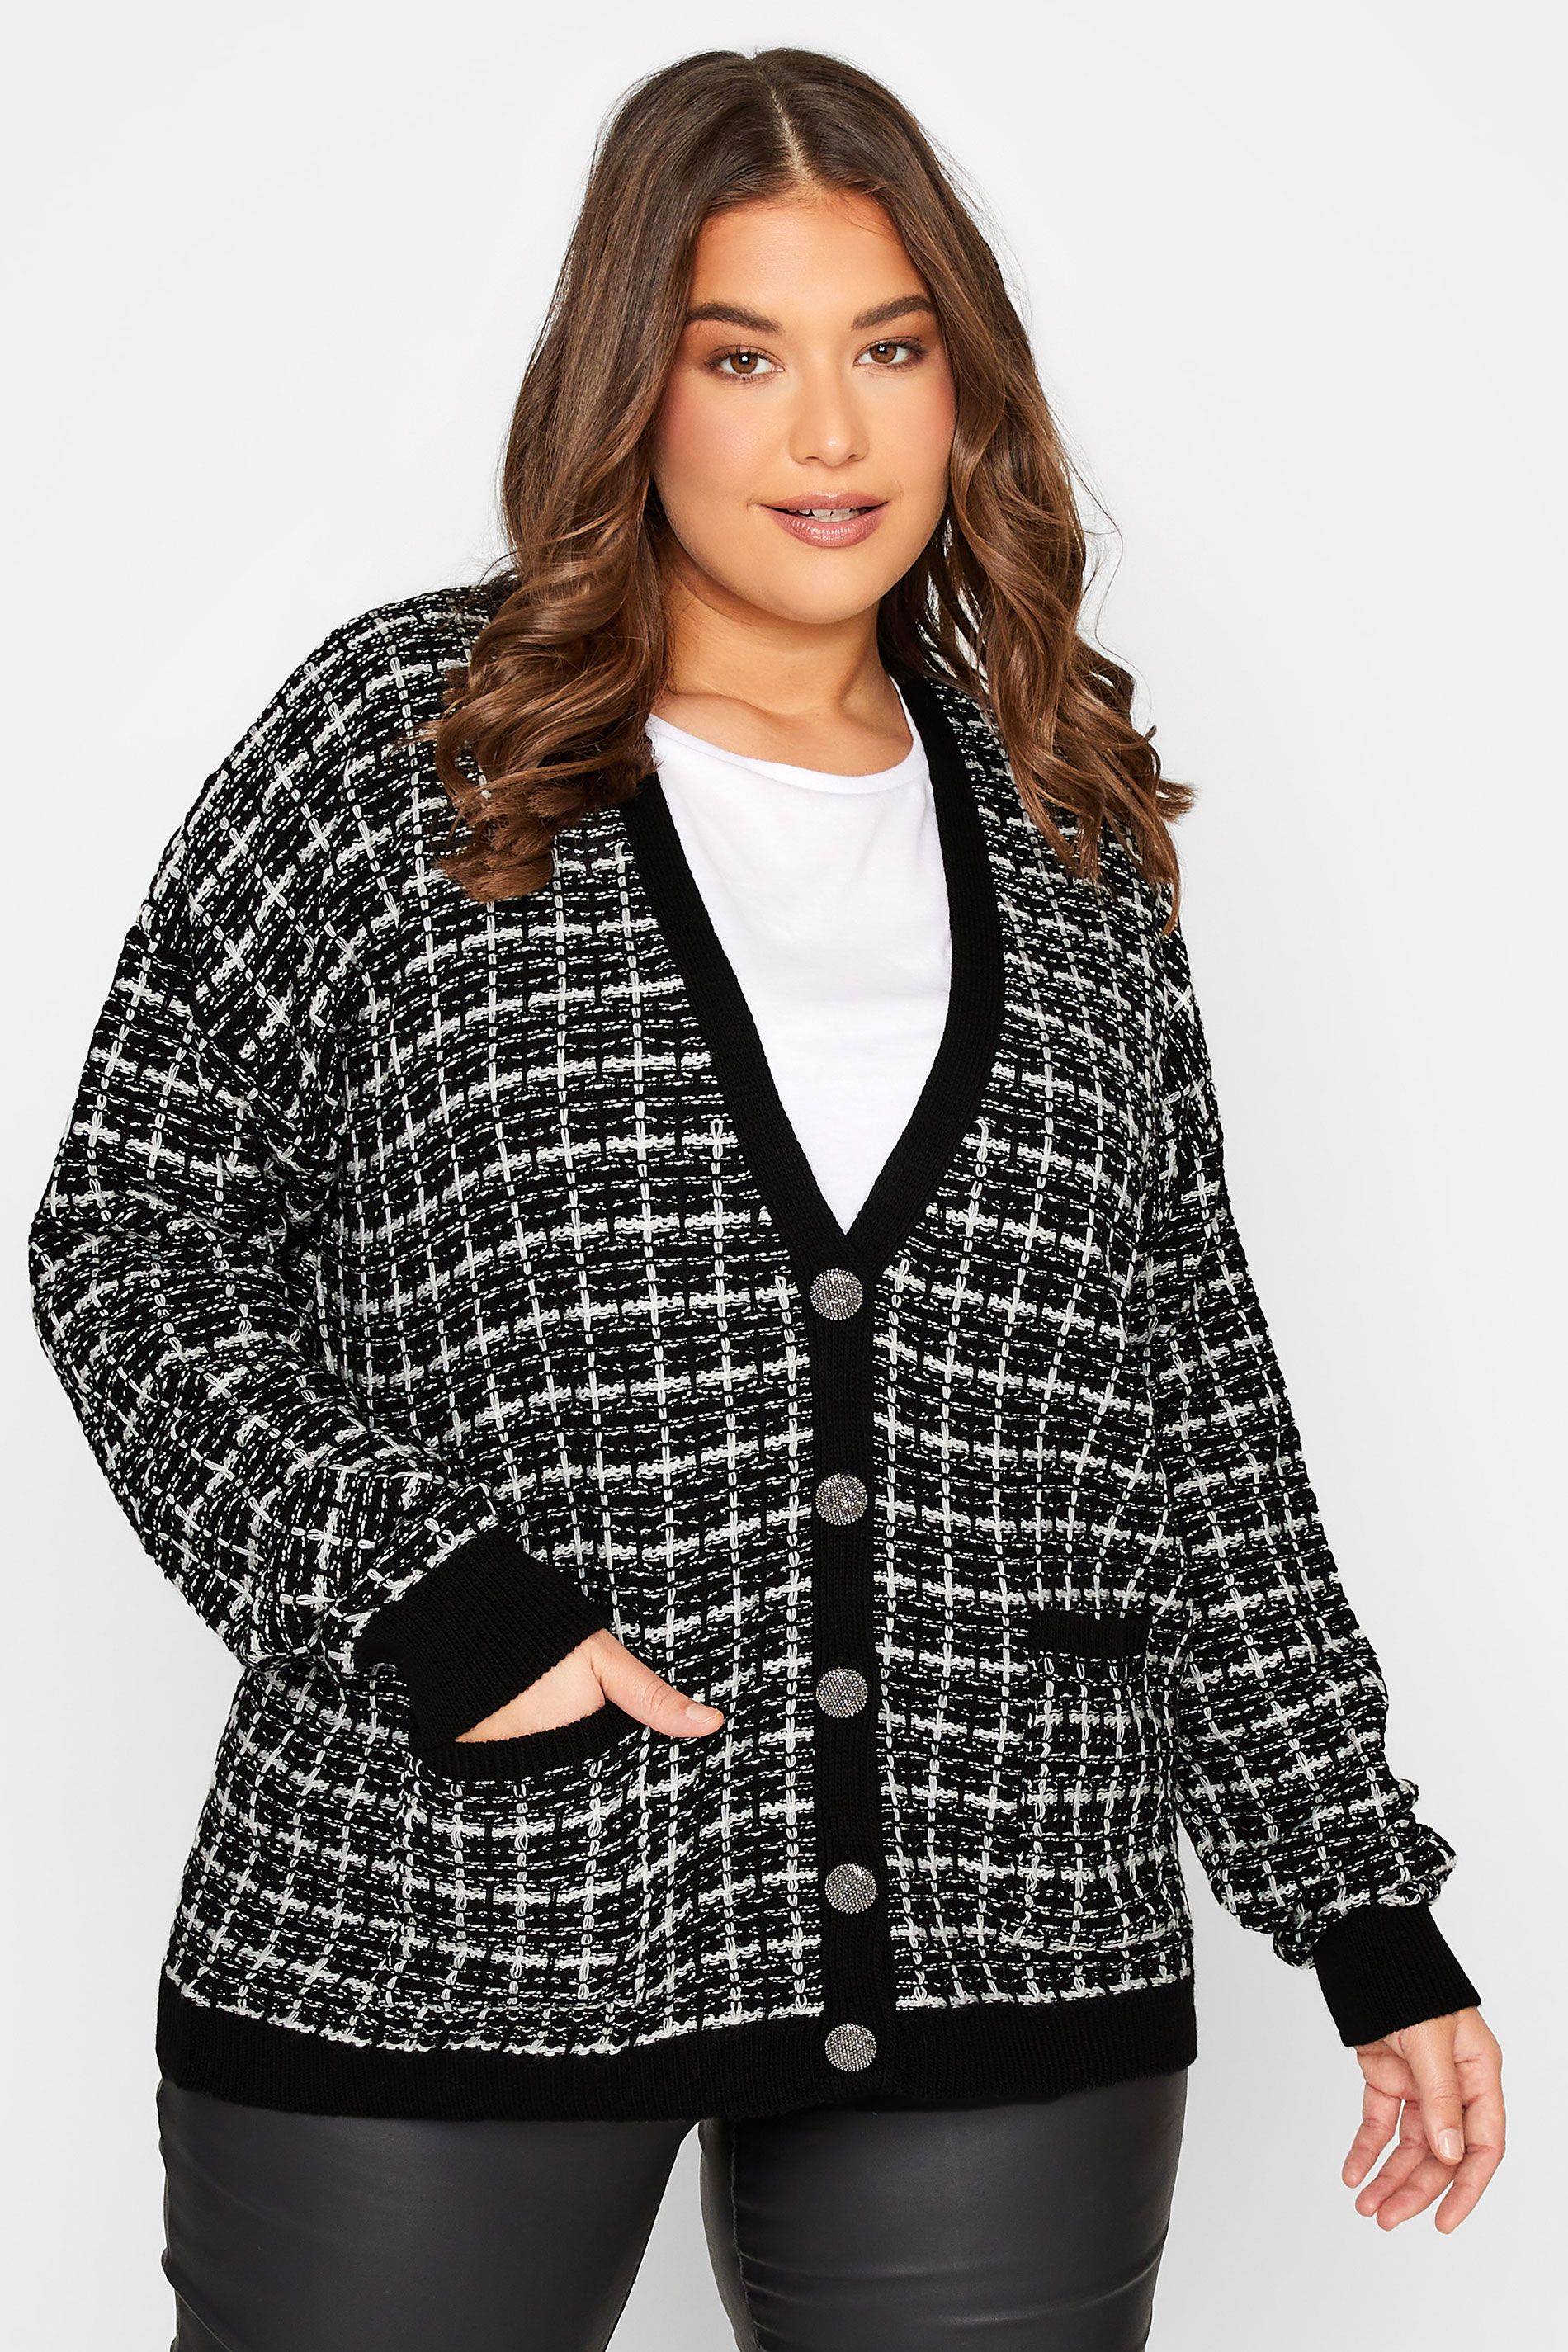 LTS Tall Women's Black Boucle Knitted Cardigan | Long Tall Sally 1